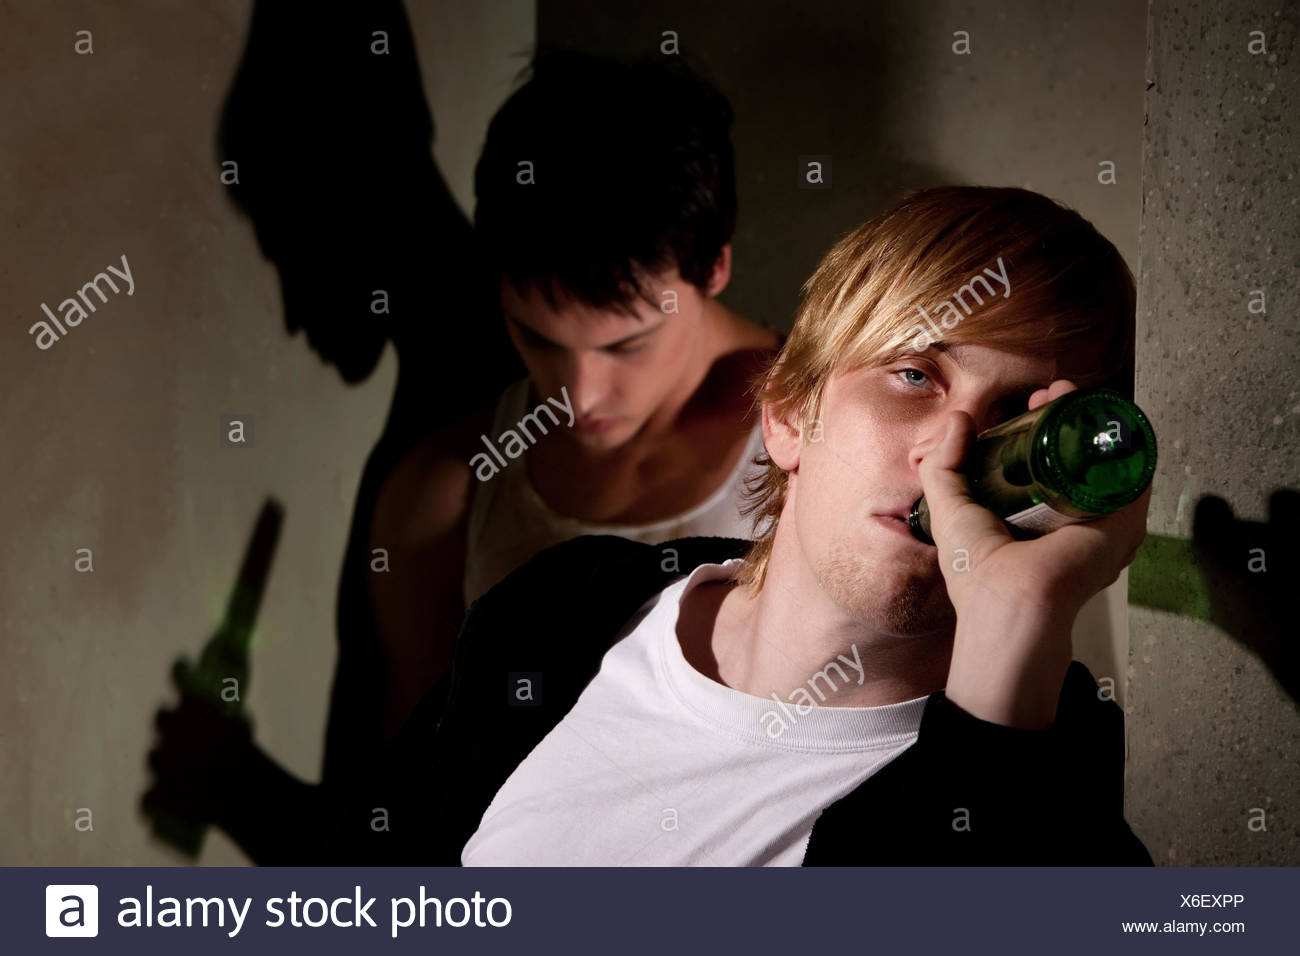 Being Drunk High Resolution Stock Photography and Images - Alamy